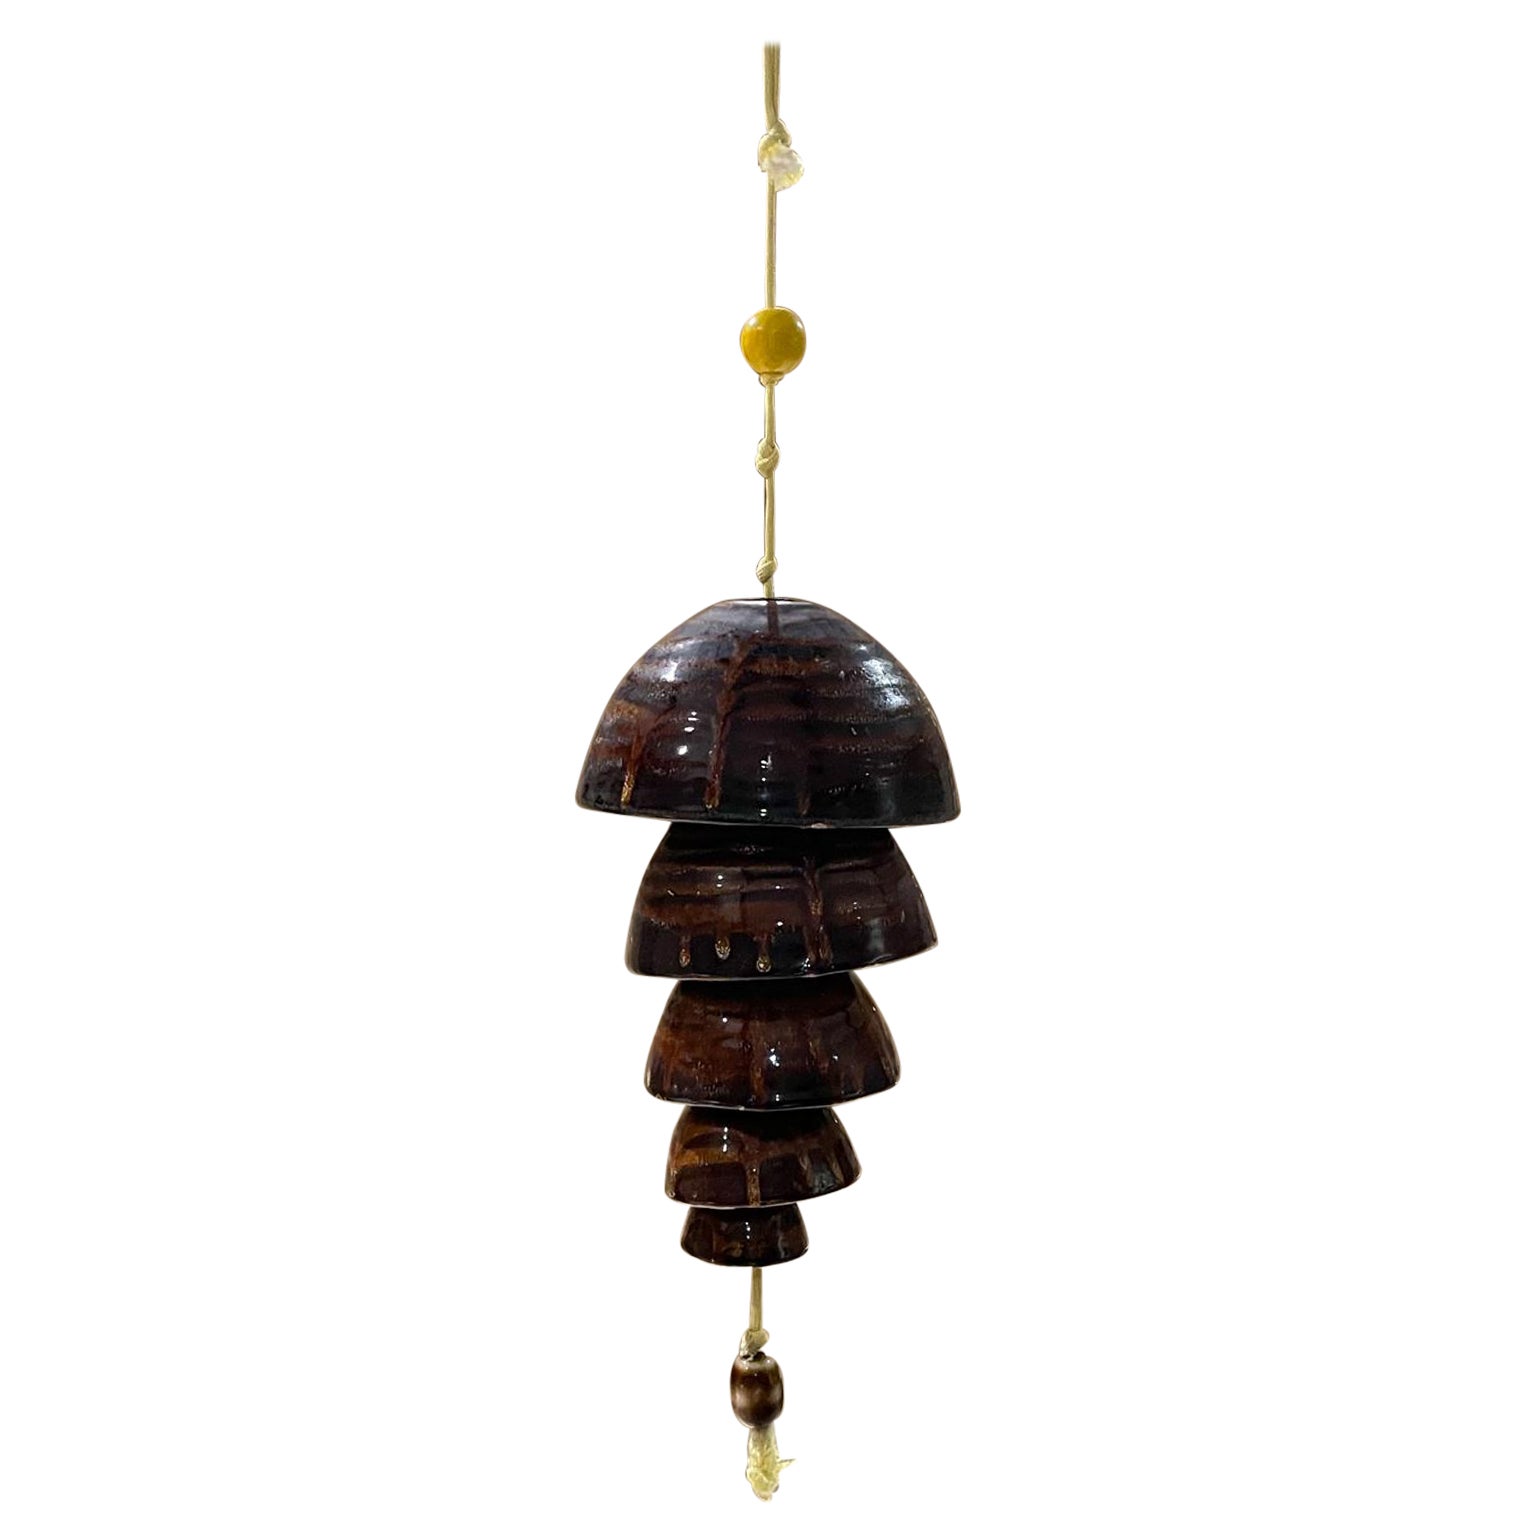 Stunning Ceramic Pottery Sculptural Drip Glazed Wind Chime Bell 1970s